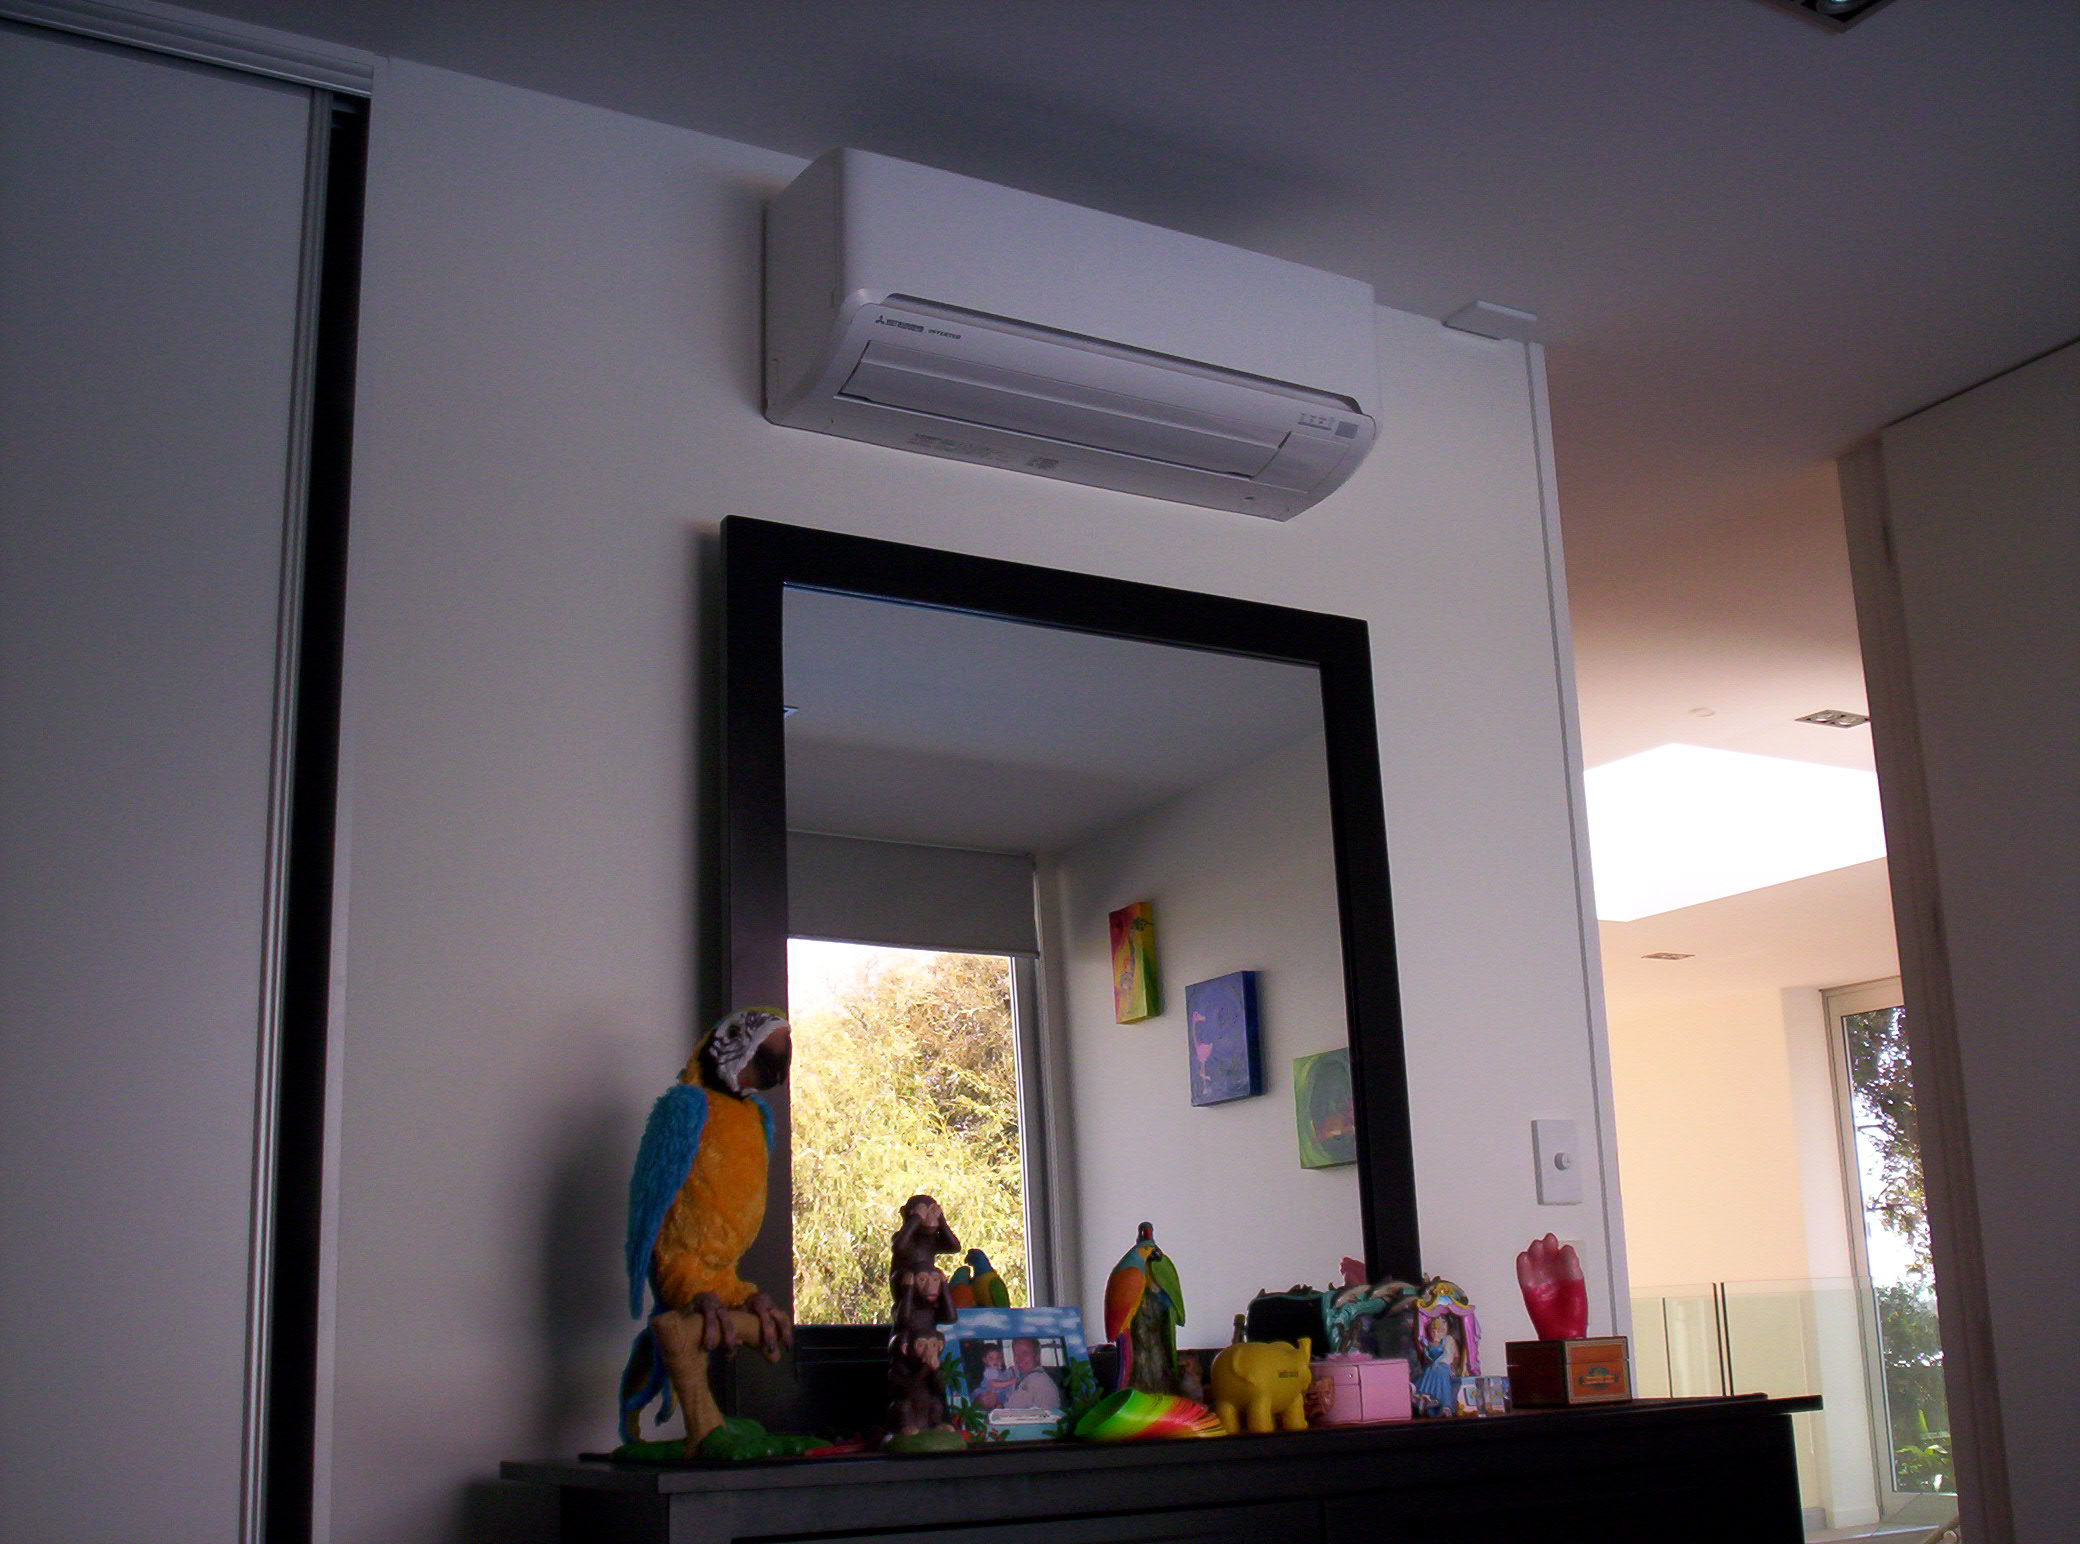 Air conditioner above cabinet photo